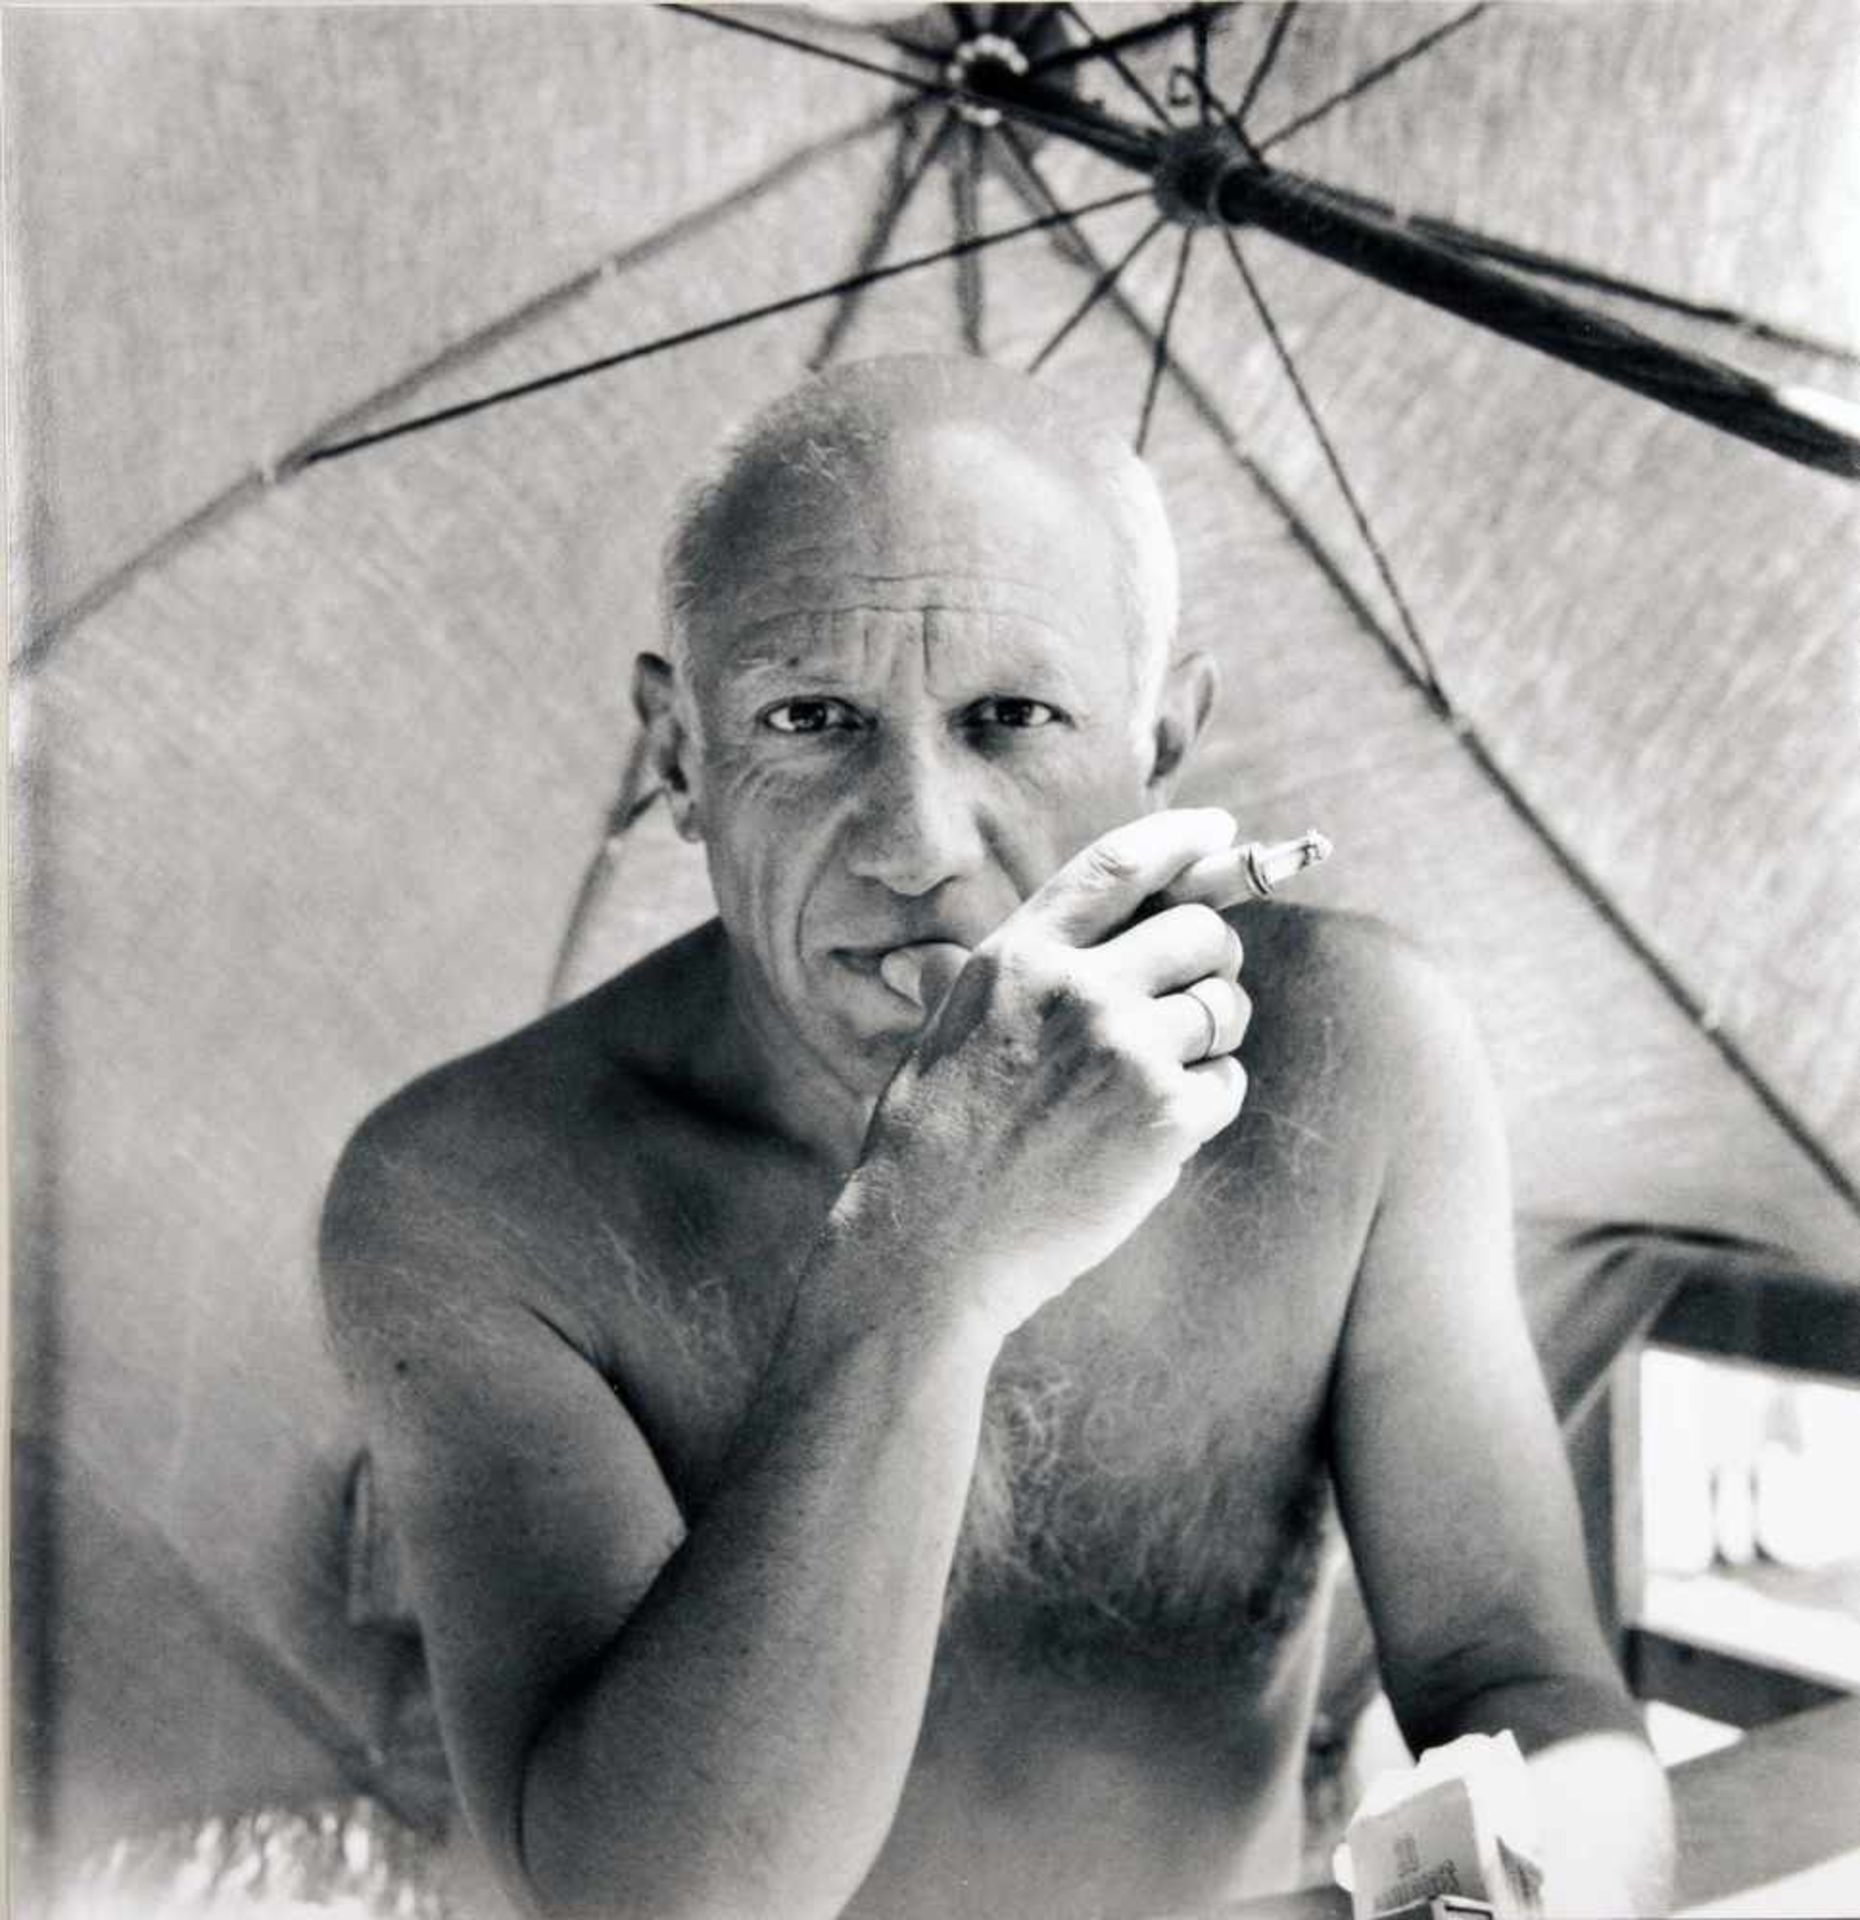 Willy Maywald. Pablo Picasso, am Strand nahe Vallauris. Fotografie. 1947/1989. 30,0 : 30,0 cm.